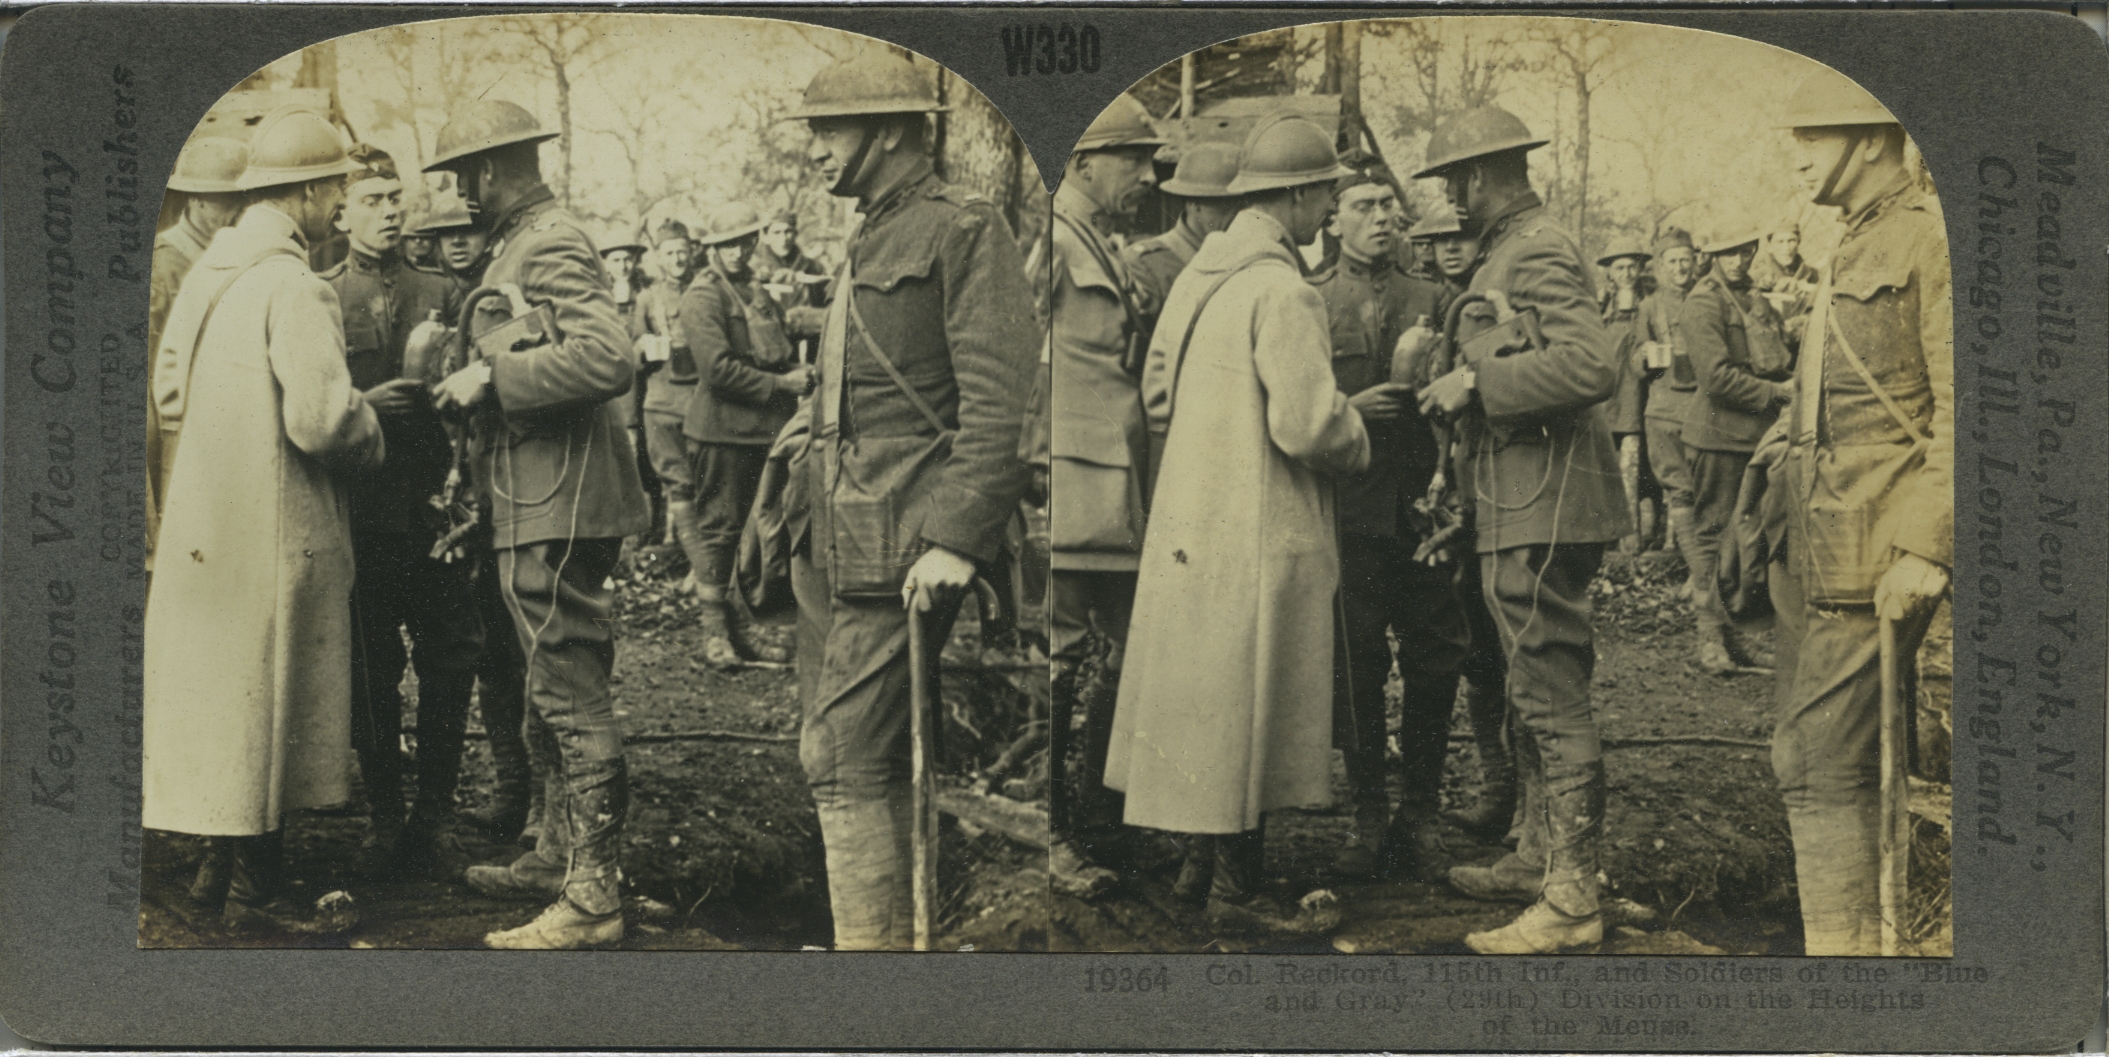 Col. Reckord, 115th Inf., and soldiers of the "Blue and Gray" (29th) Division on the Heights of the Meuse